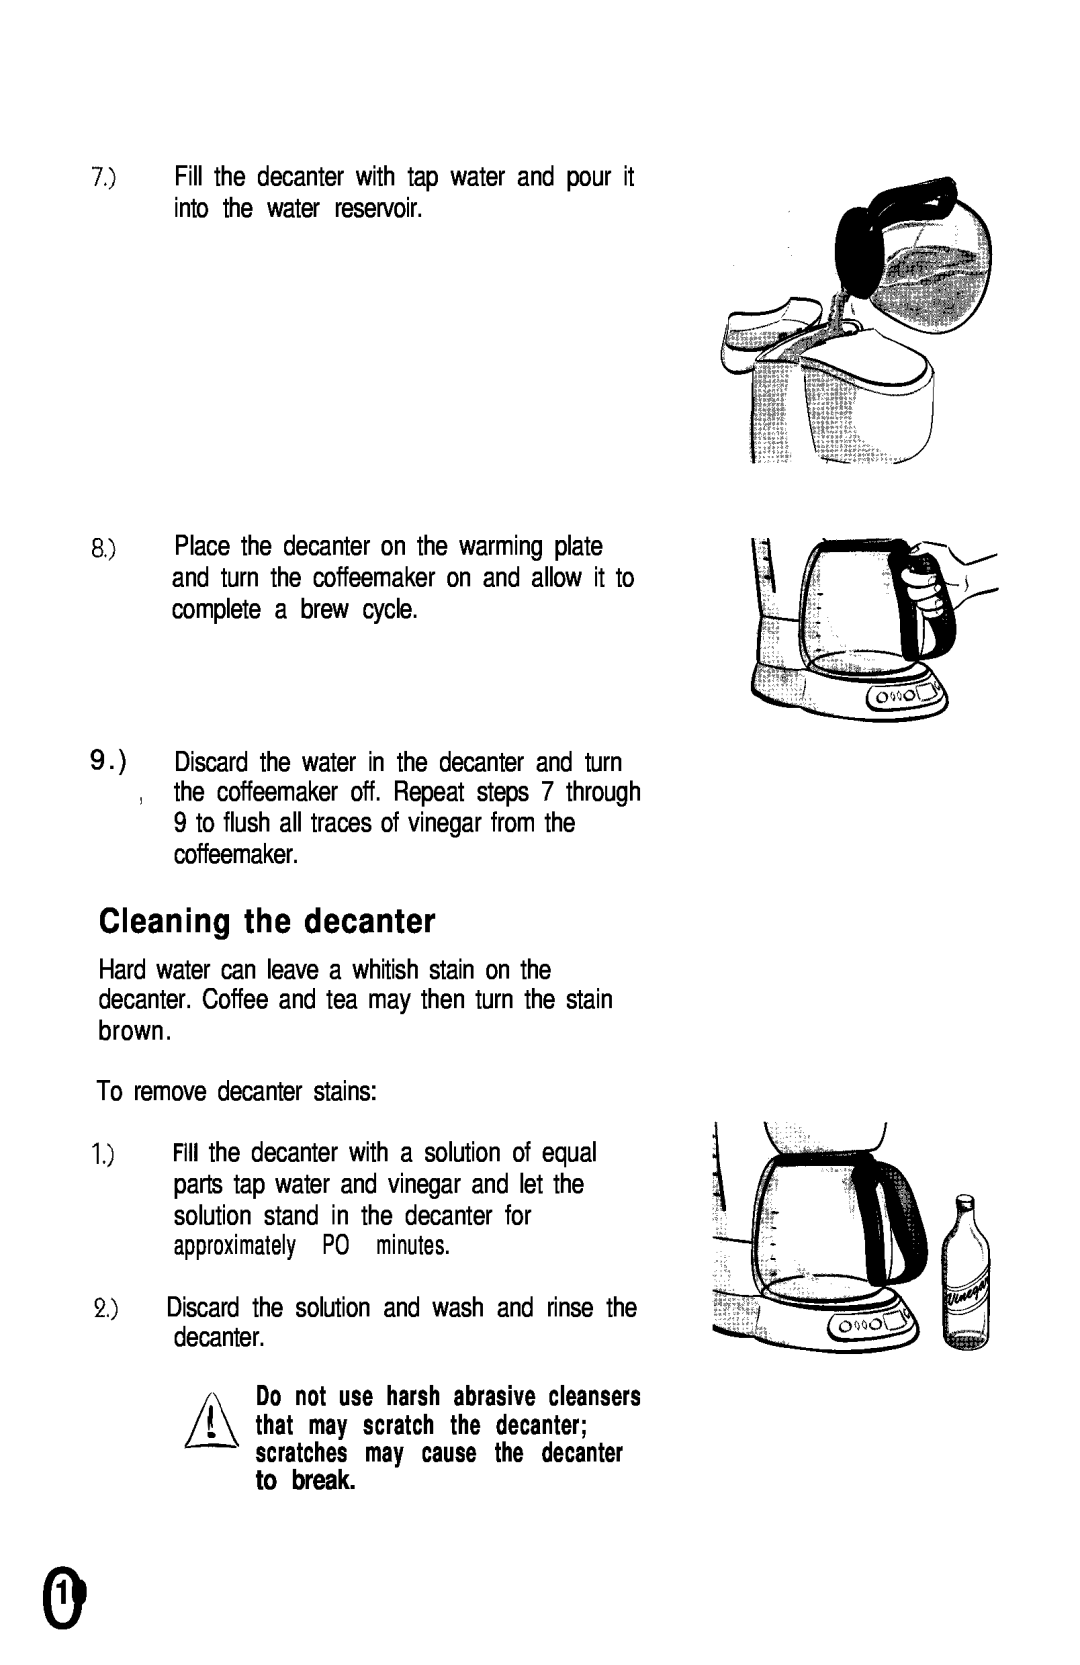 Mr. Coffee UN12 user manual Cleaning the decanter, scratches may cause the decanter to break 